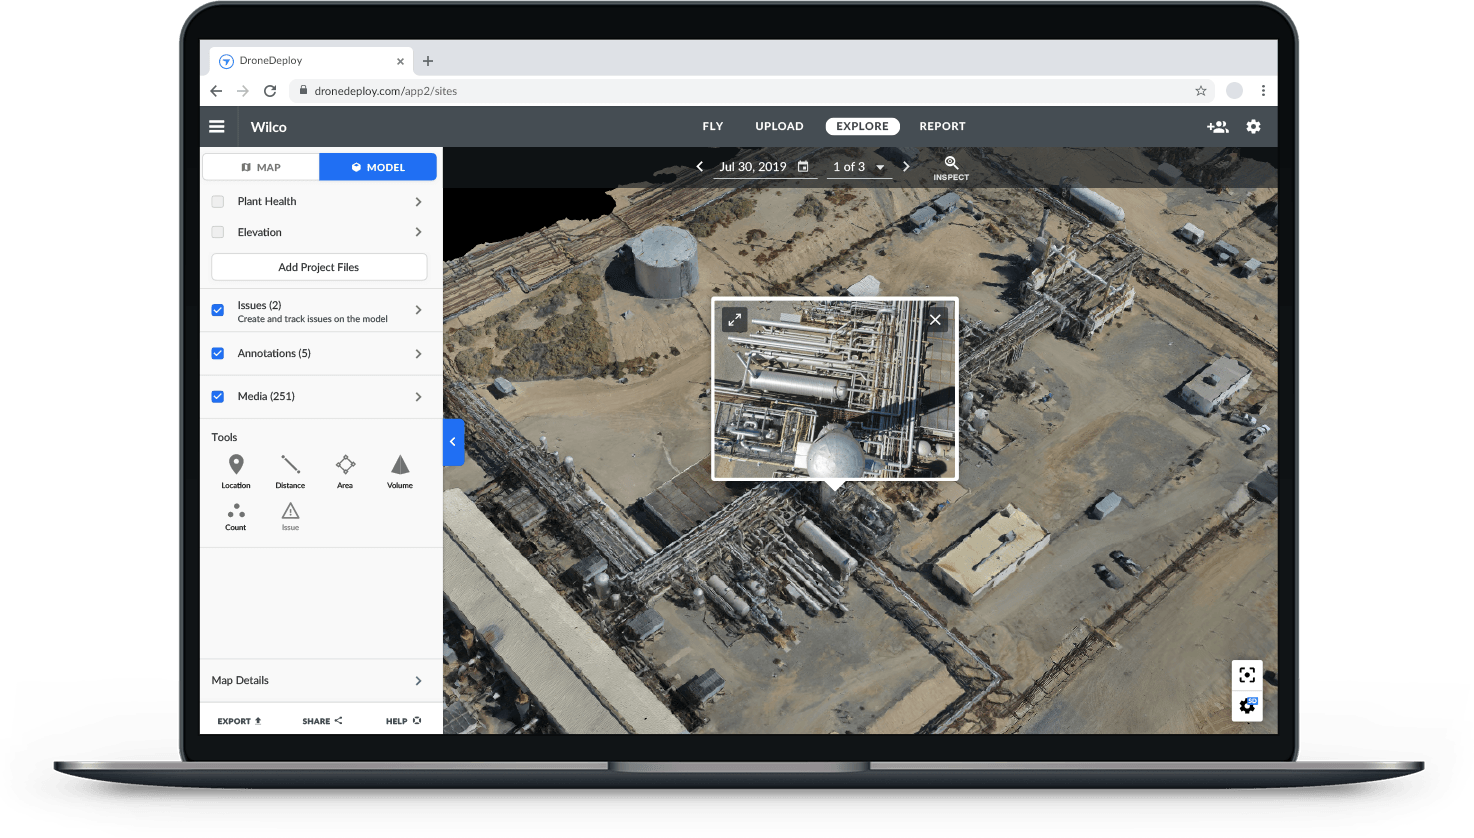 DroneDeploy drone mapping software